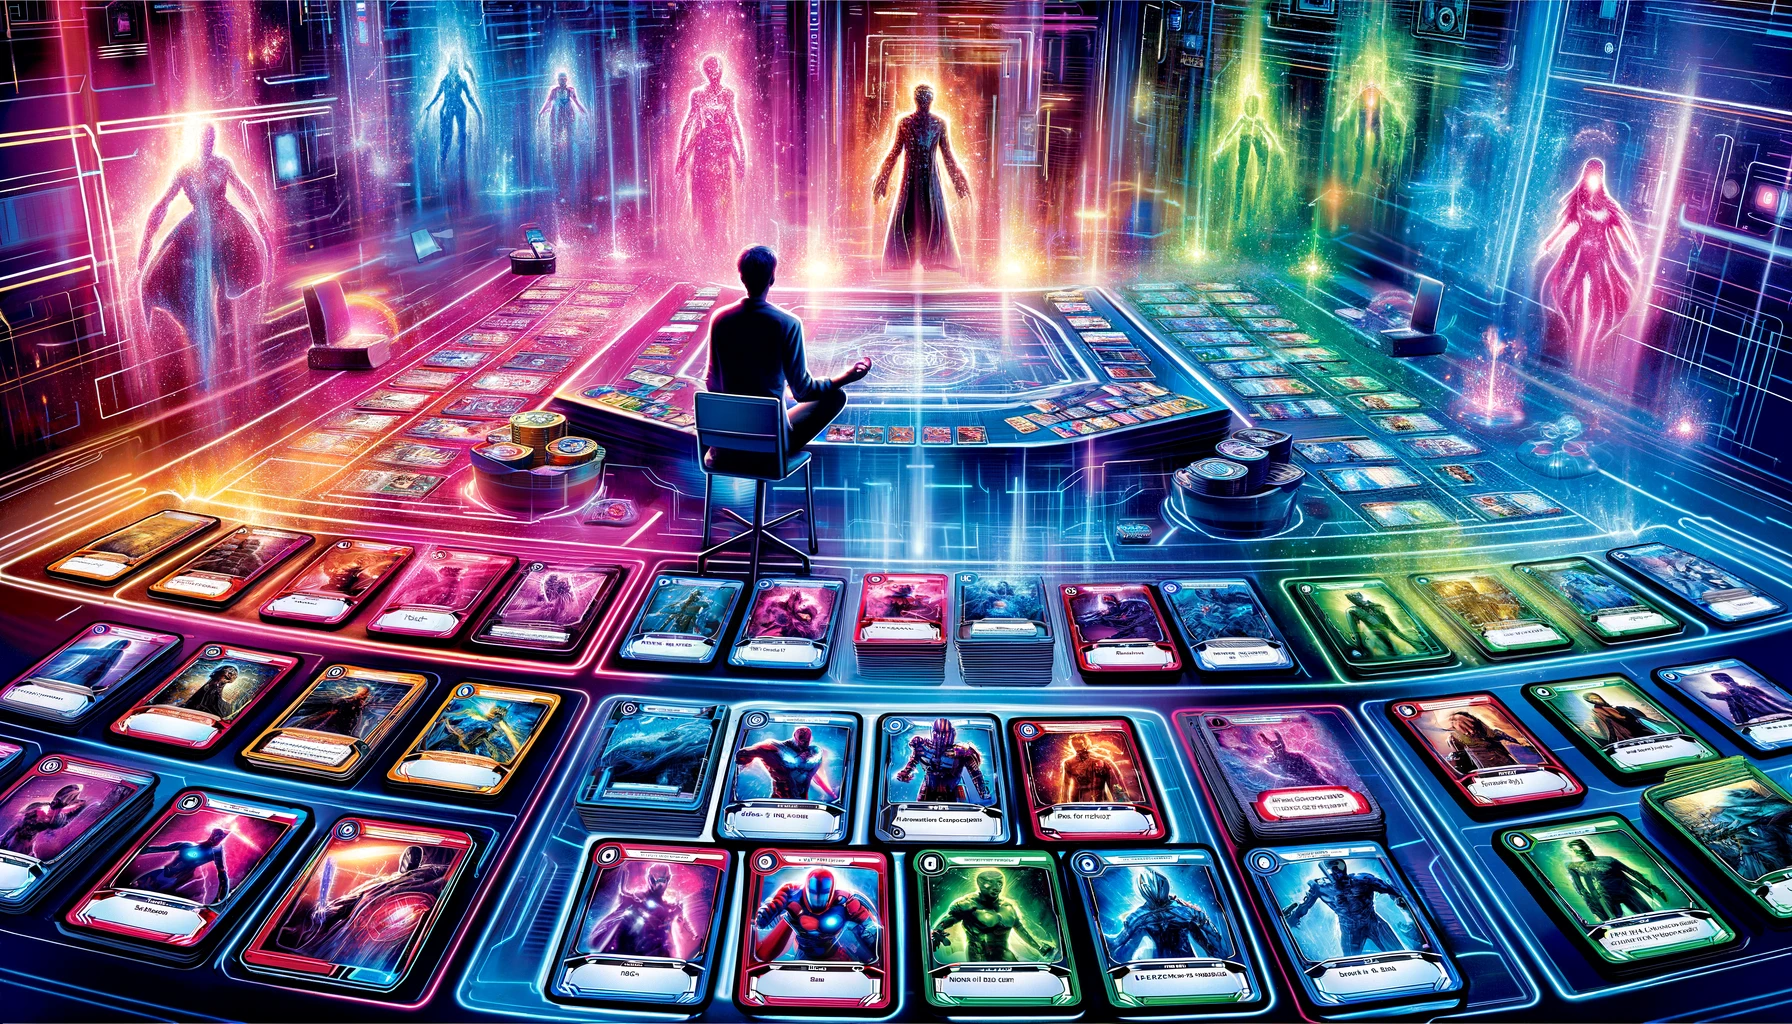 A vibrant, detailed wide-format illustration of a strategic scene in Marvel Snap, showing cards laid out on a futuristic playing board with a player contemplating their next move, surrounded by holographic projections of characters and colorful energy effects.